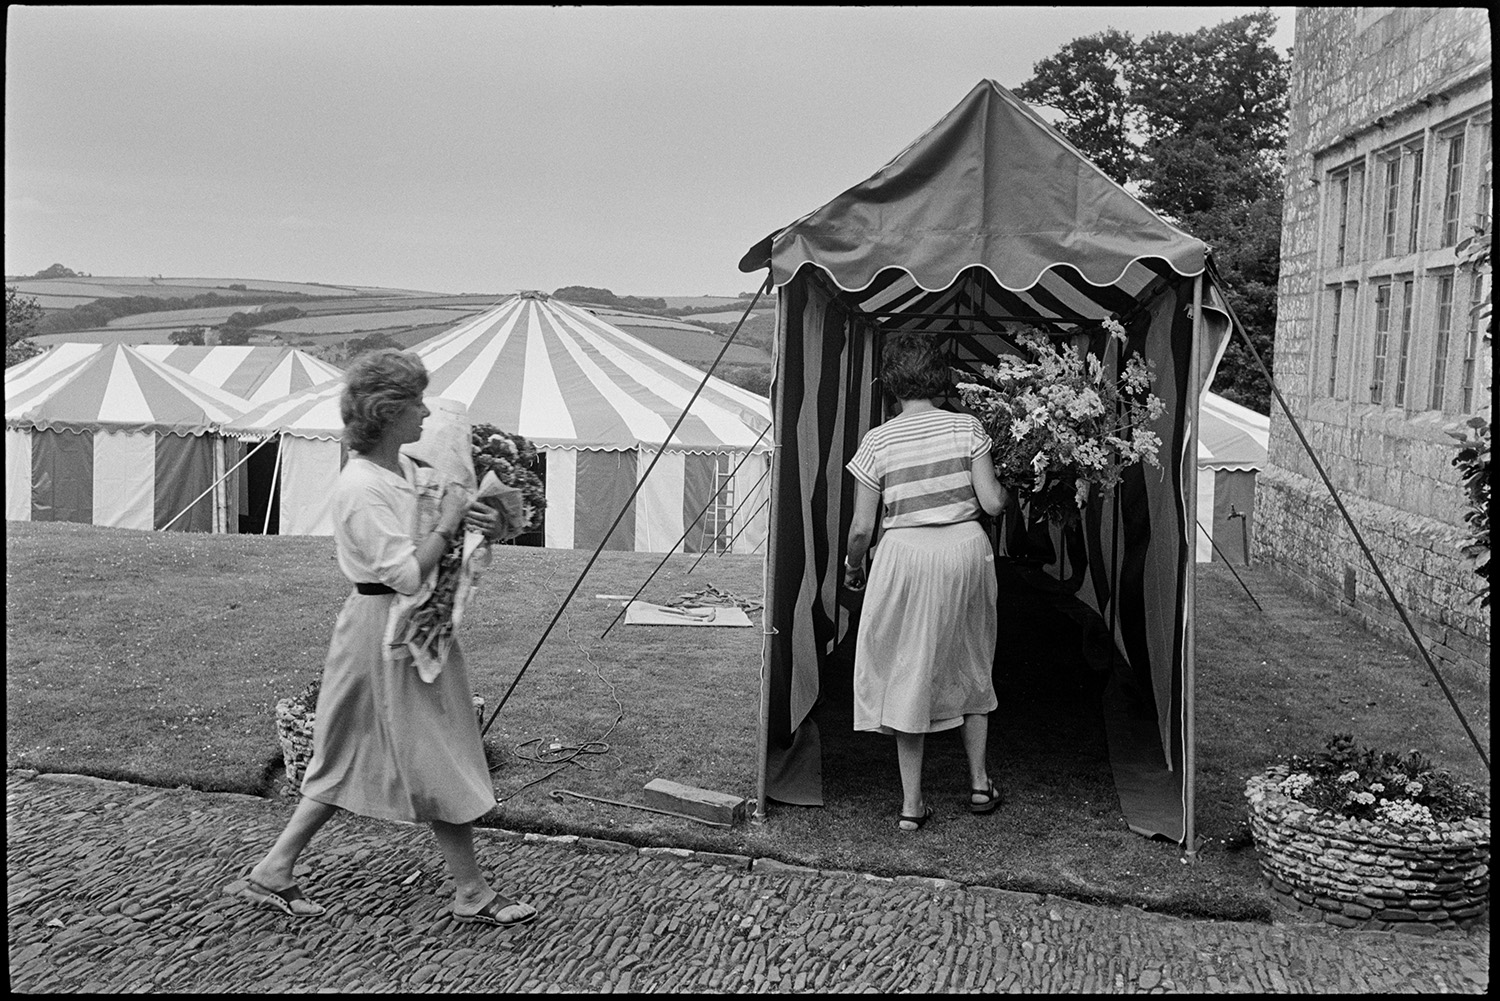 Women decorating marquee tent for hunt ball with flowers.
[Women walking into a marquee entrance with flower arrangements for the Eggesford Hunt Ball at Colleton Manor, Chulmleigh. The marquee entrance is by a cobbled pathway.]